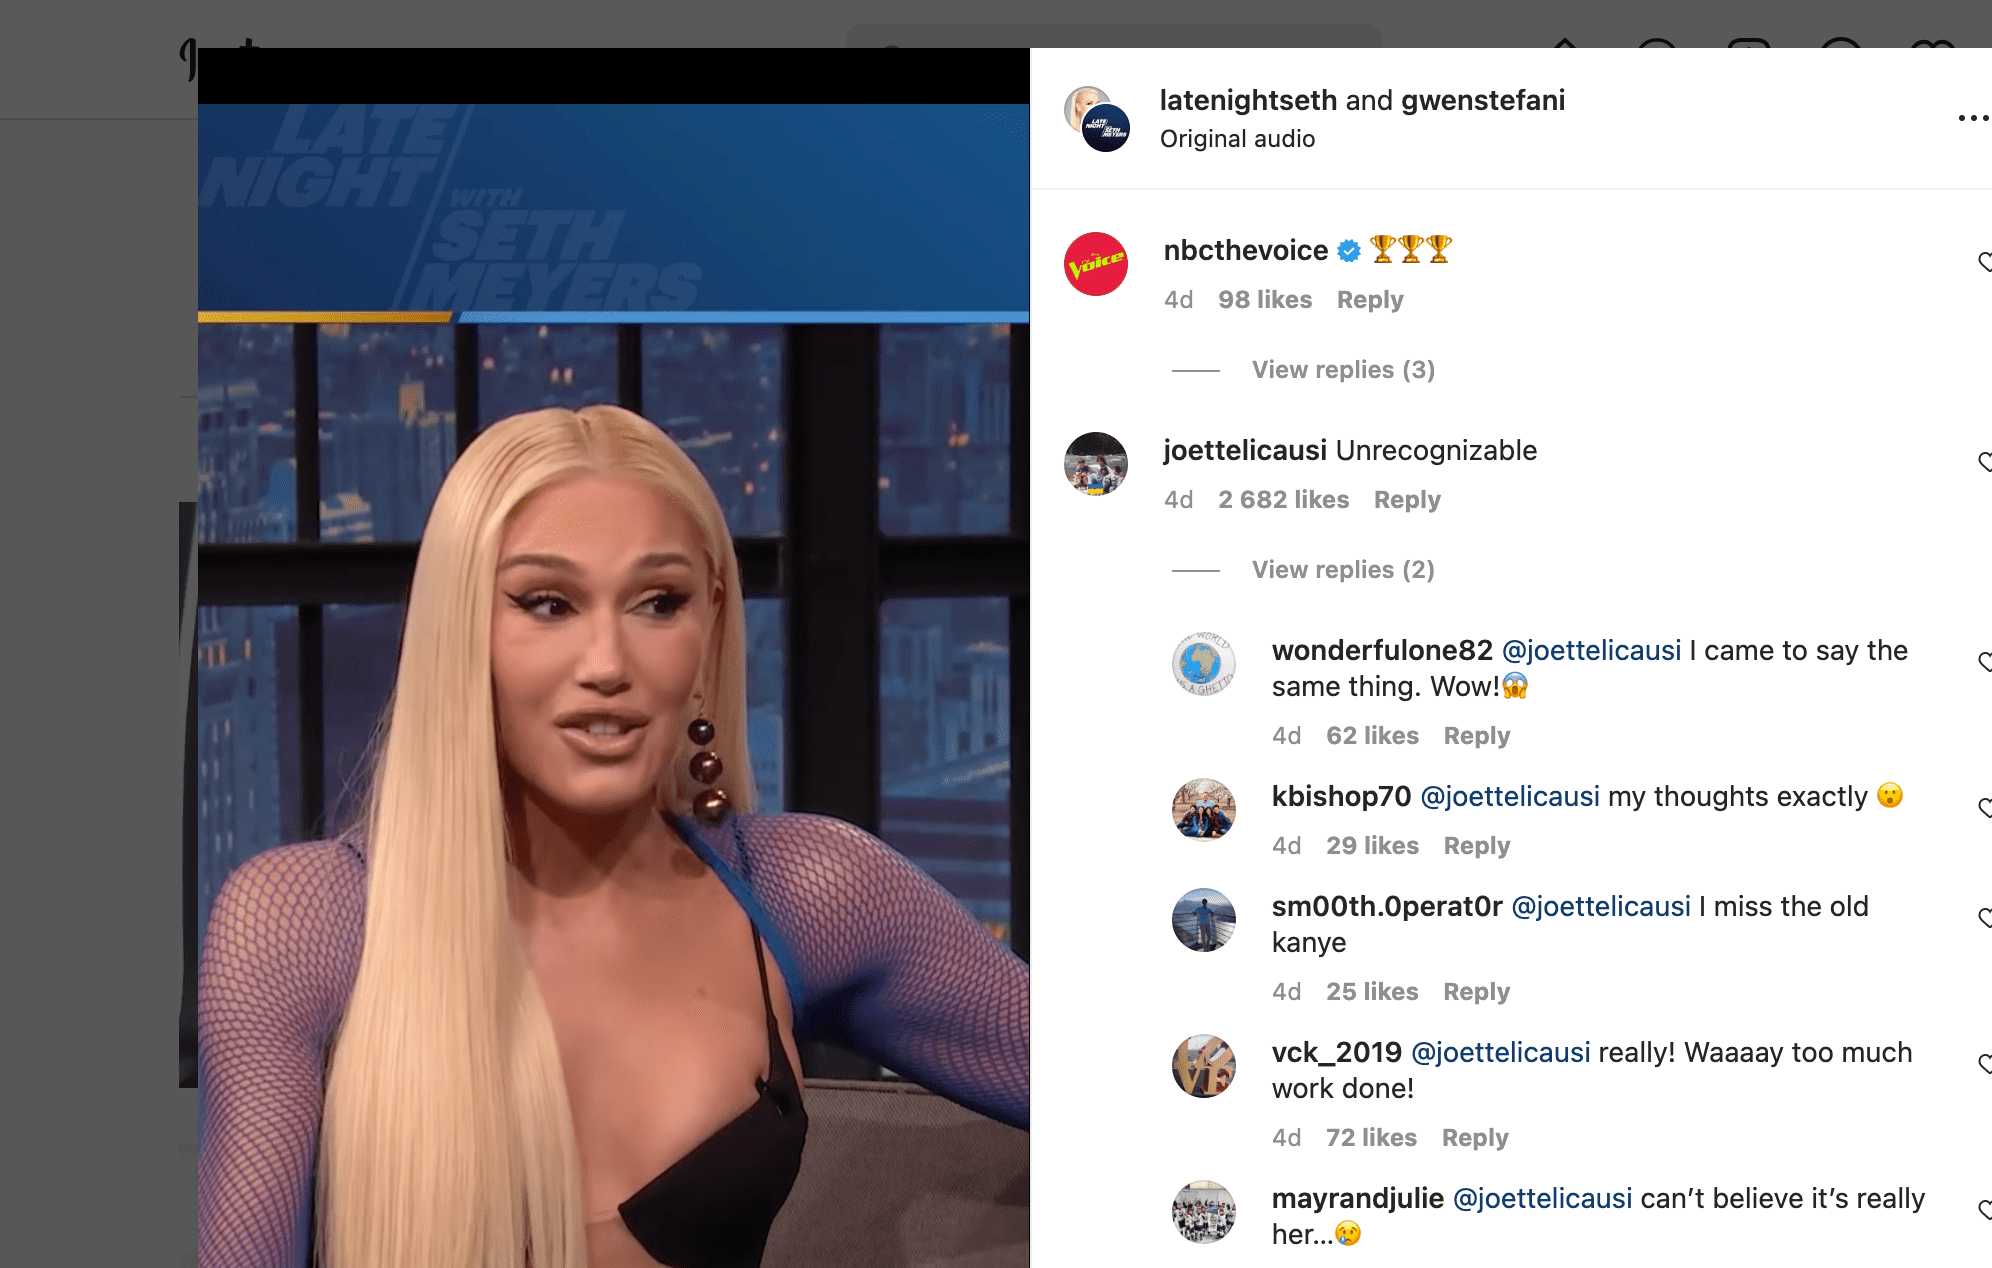 Comments from Gwen Stefani's interview on "The Tonight Show with Seth Meyers" in 2022 | Source: Instgram.com/latenightseth